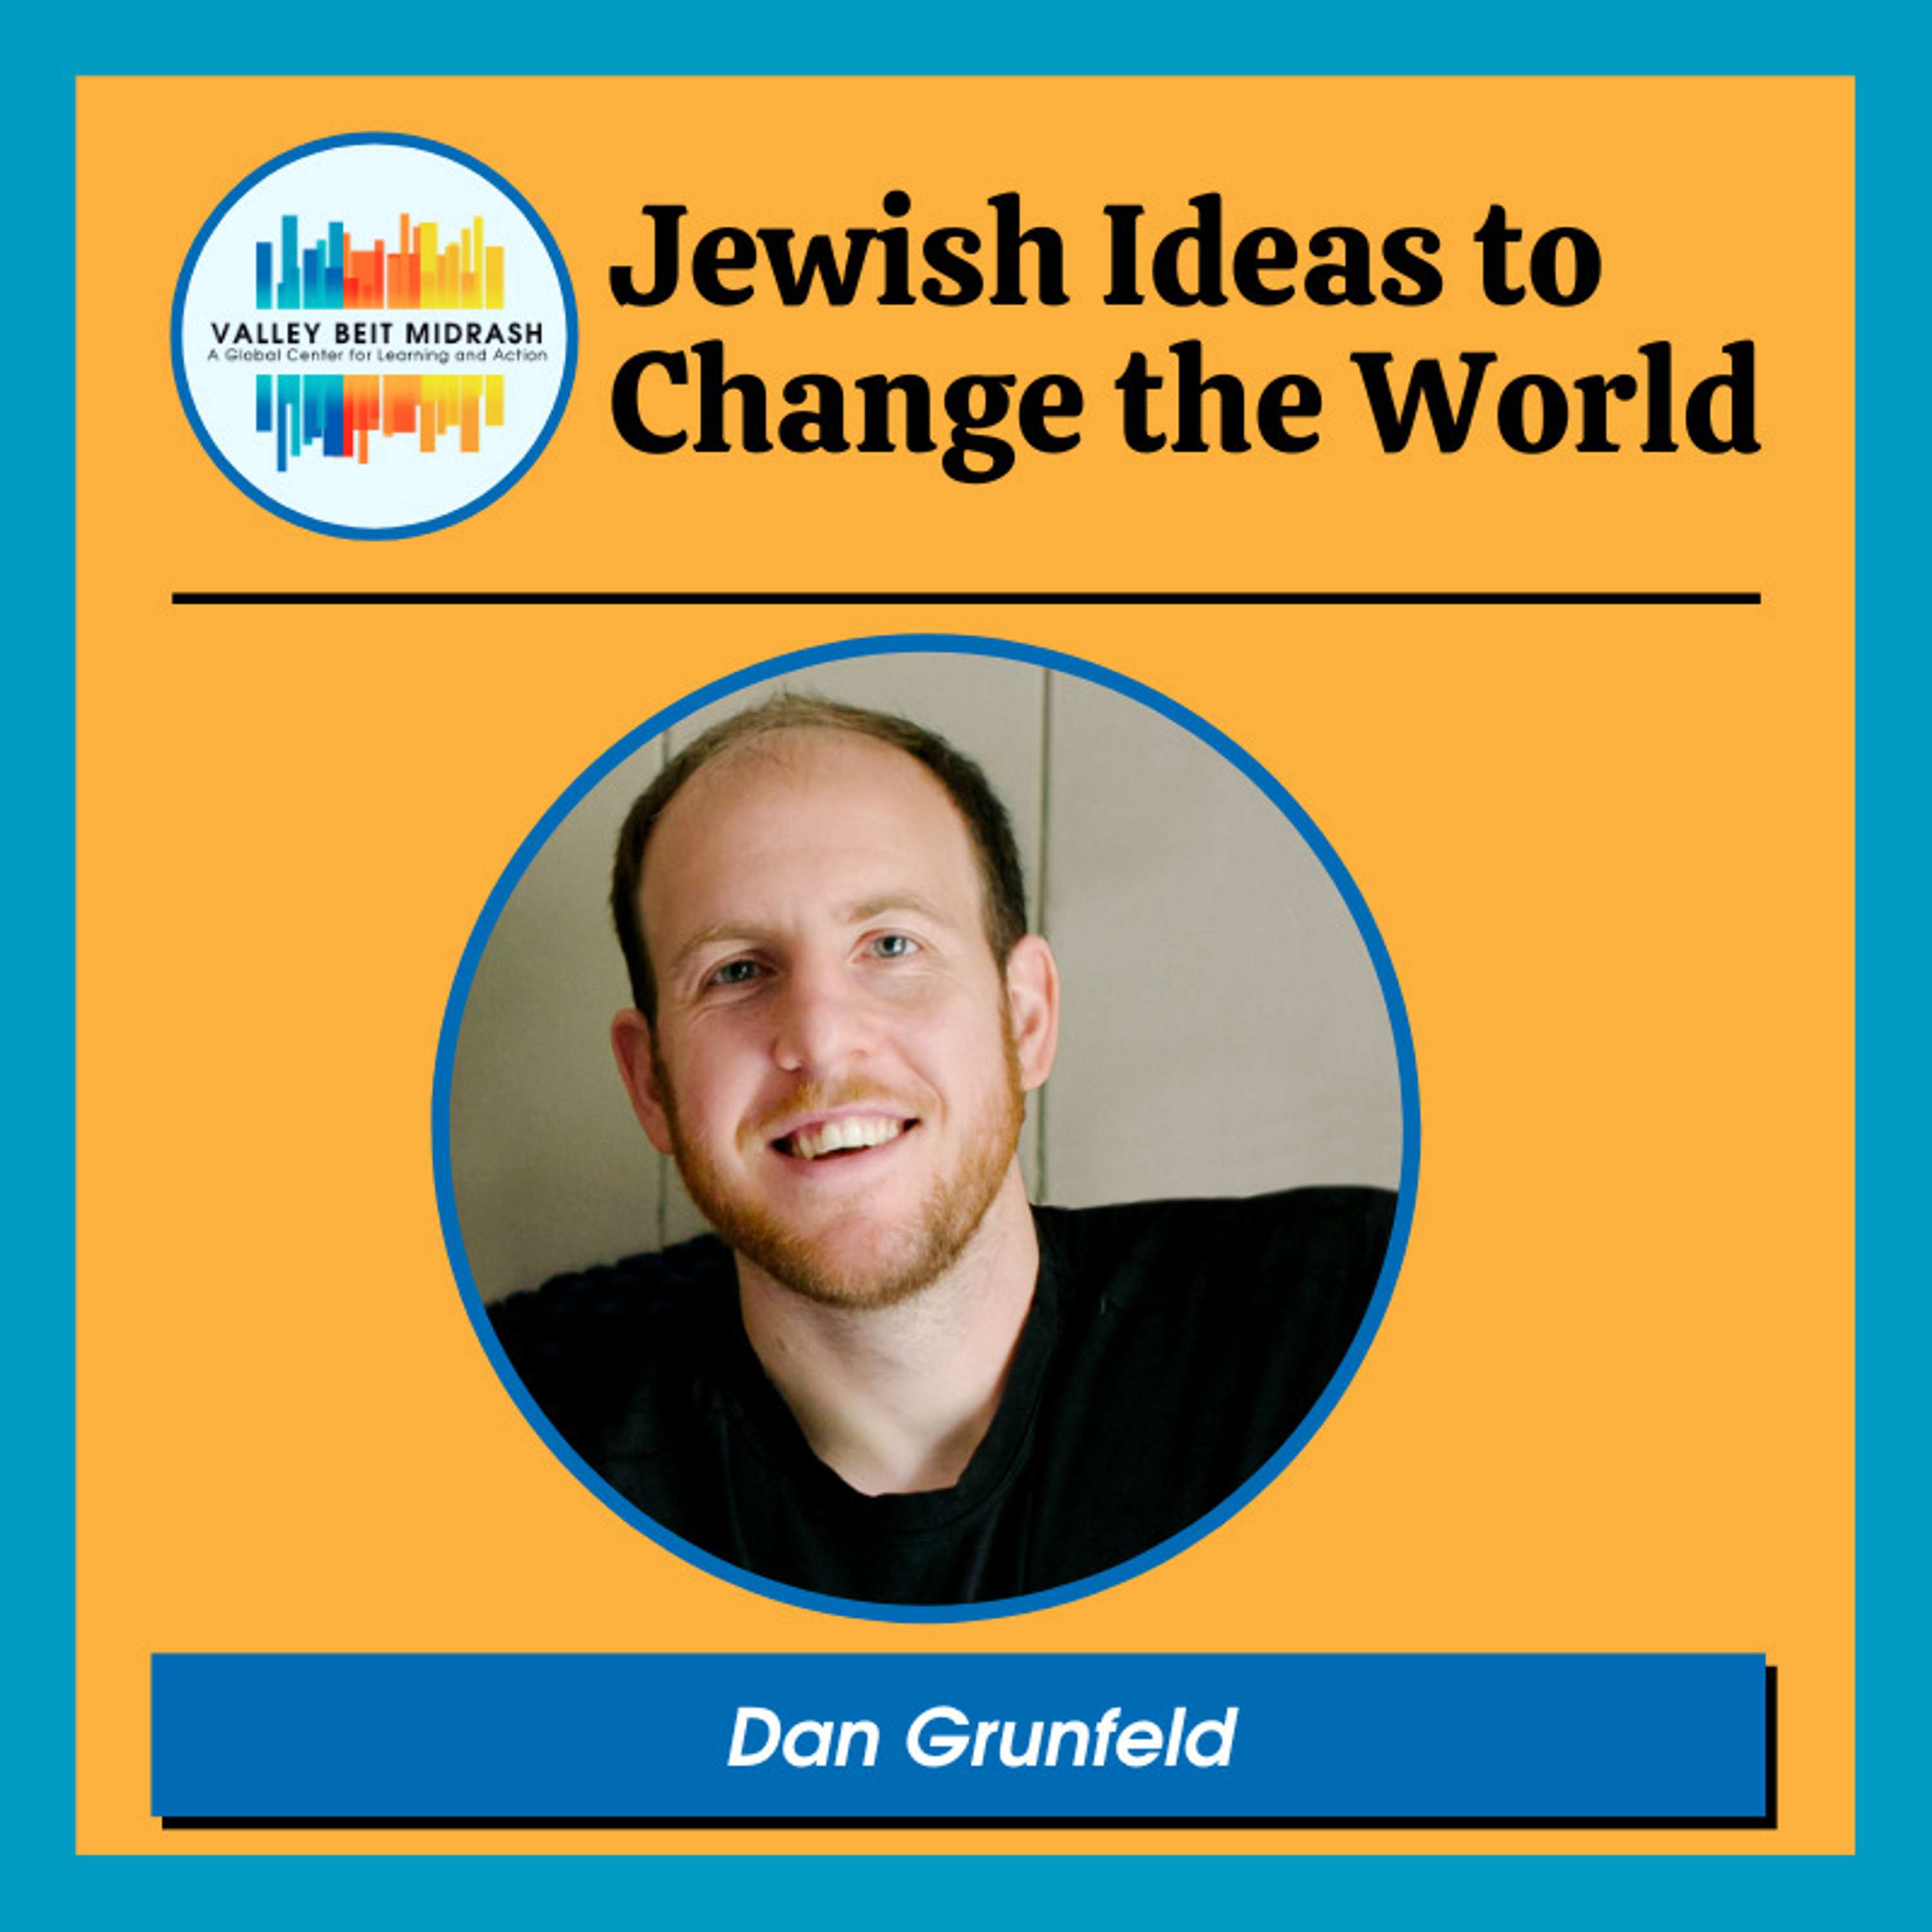 A Conversation With Former Professional Basketball Player Dan Grunfeld on His Book on the Holocaust